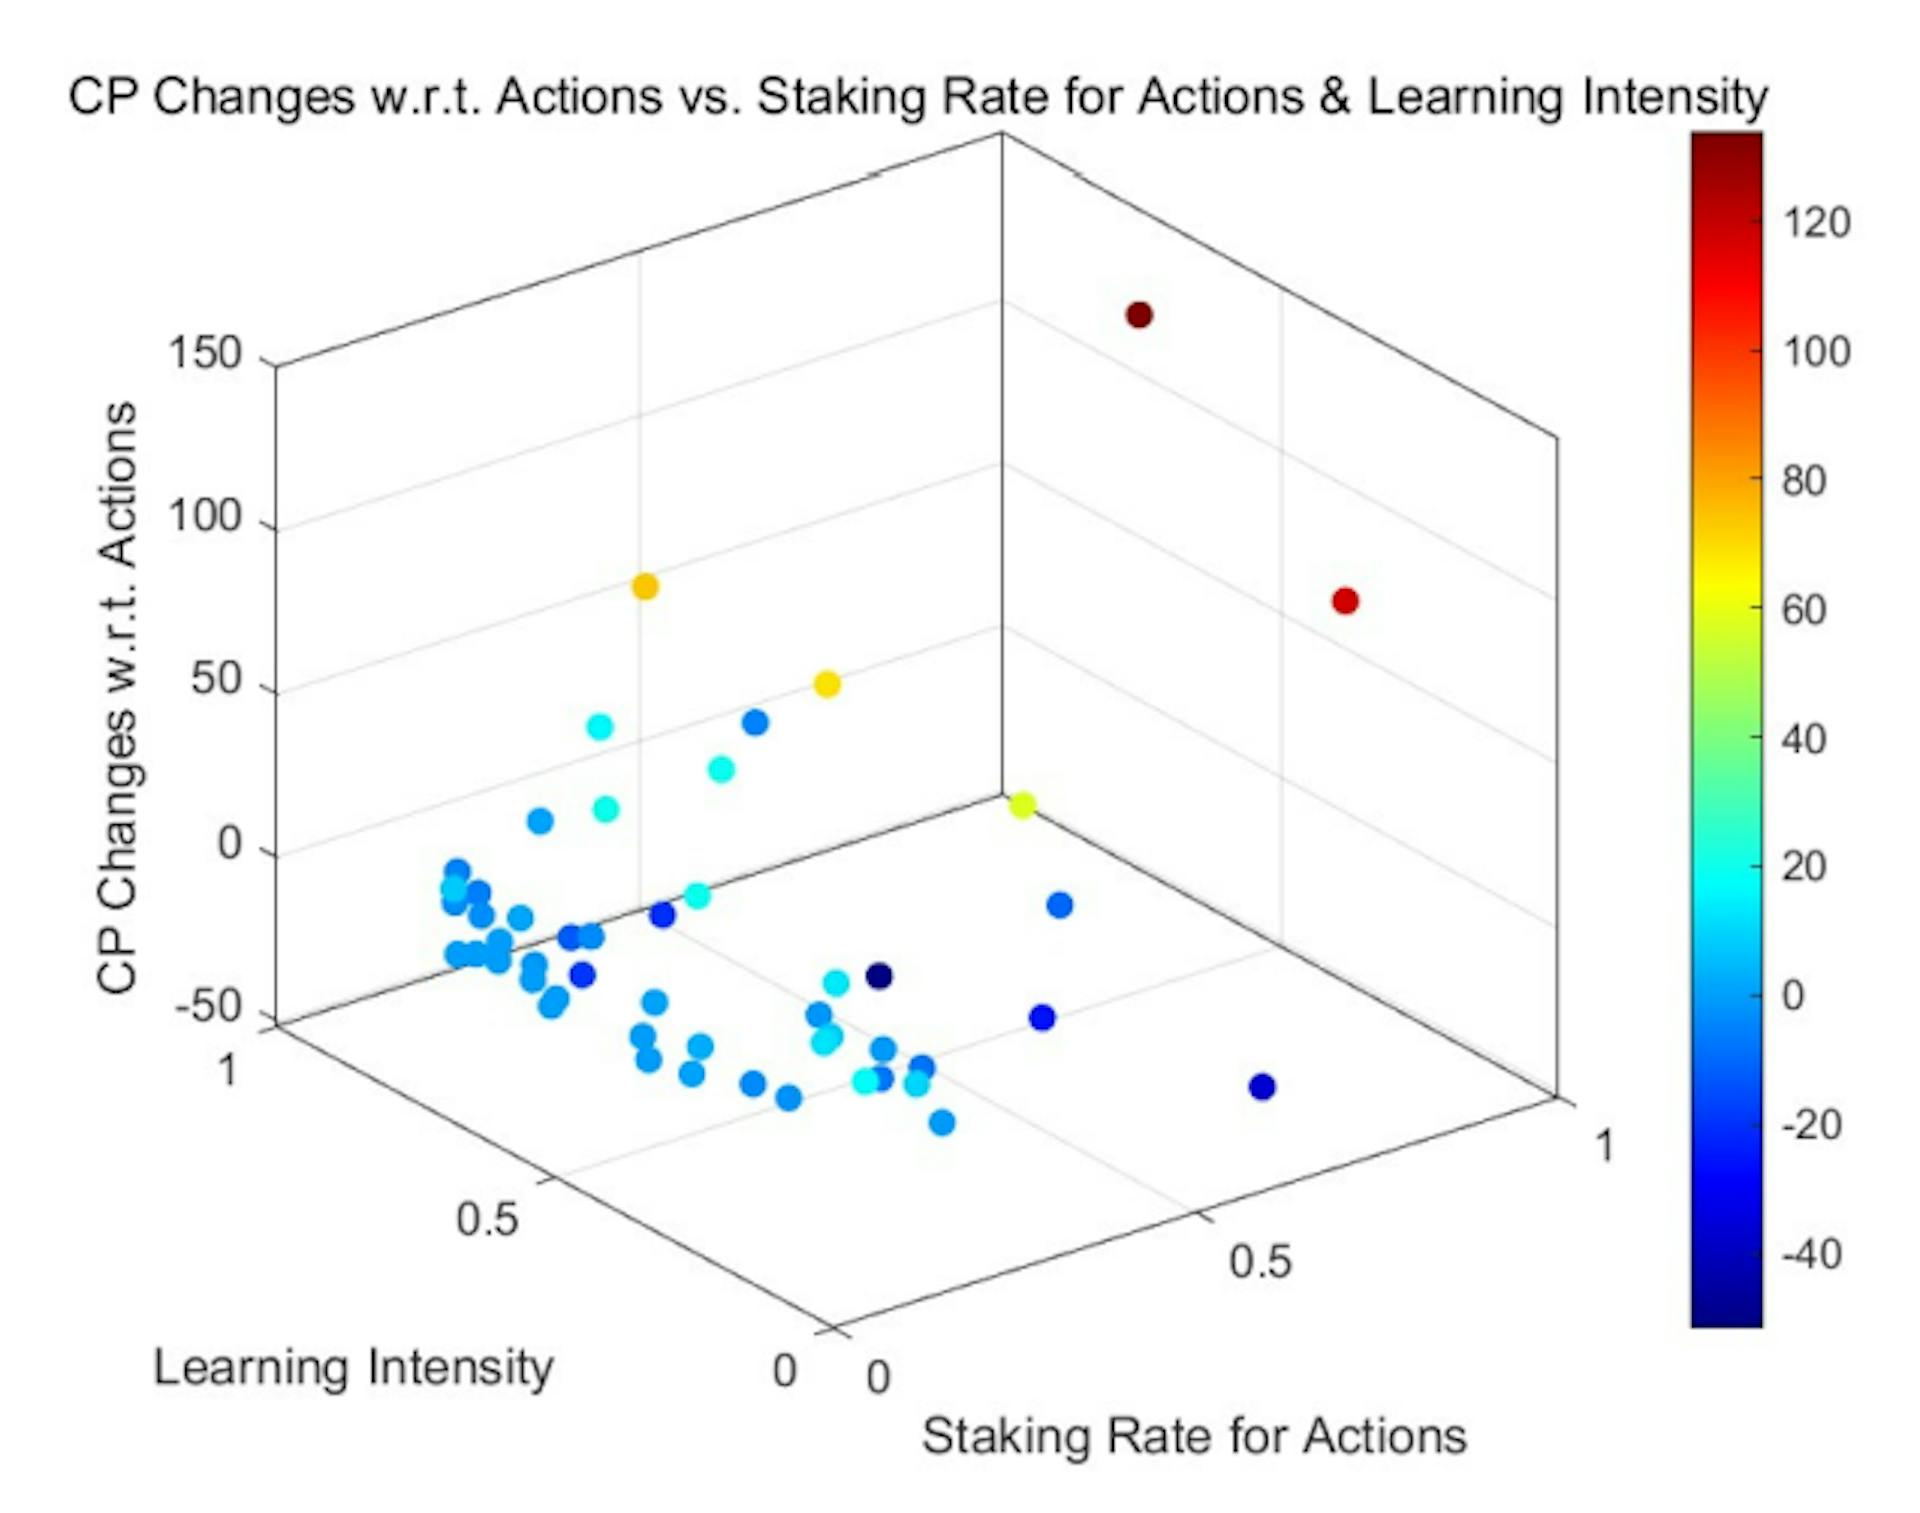 Figure 7: Changes of Credit Points w.r.t. Actions vs. Staking Rate for Actions & Random Learning Intensity (Power-LawInitial-Distribution)